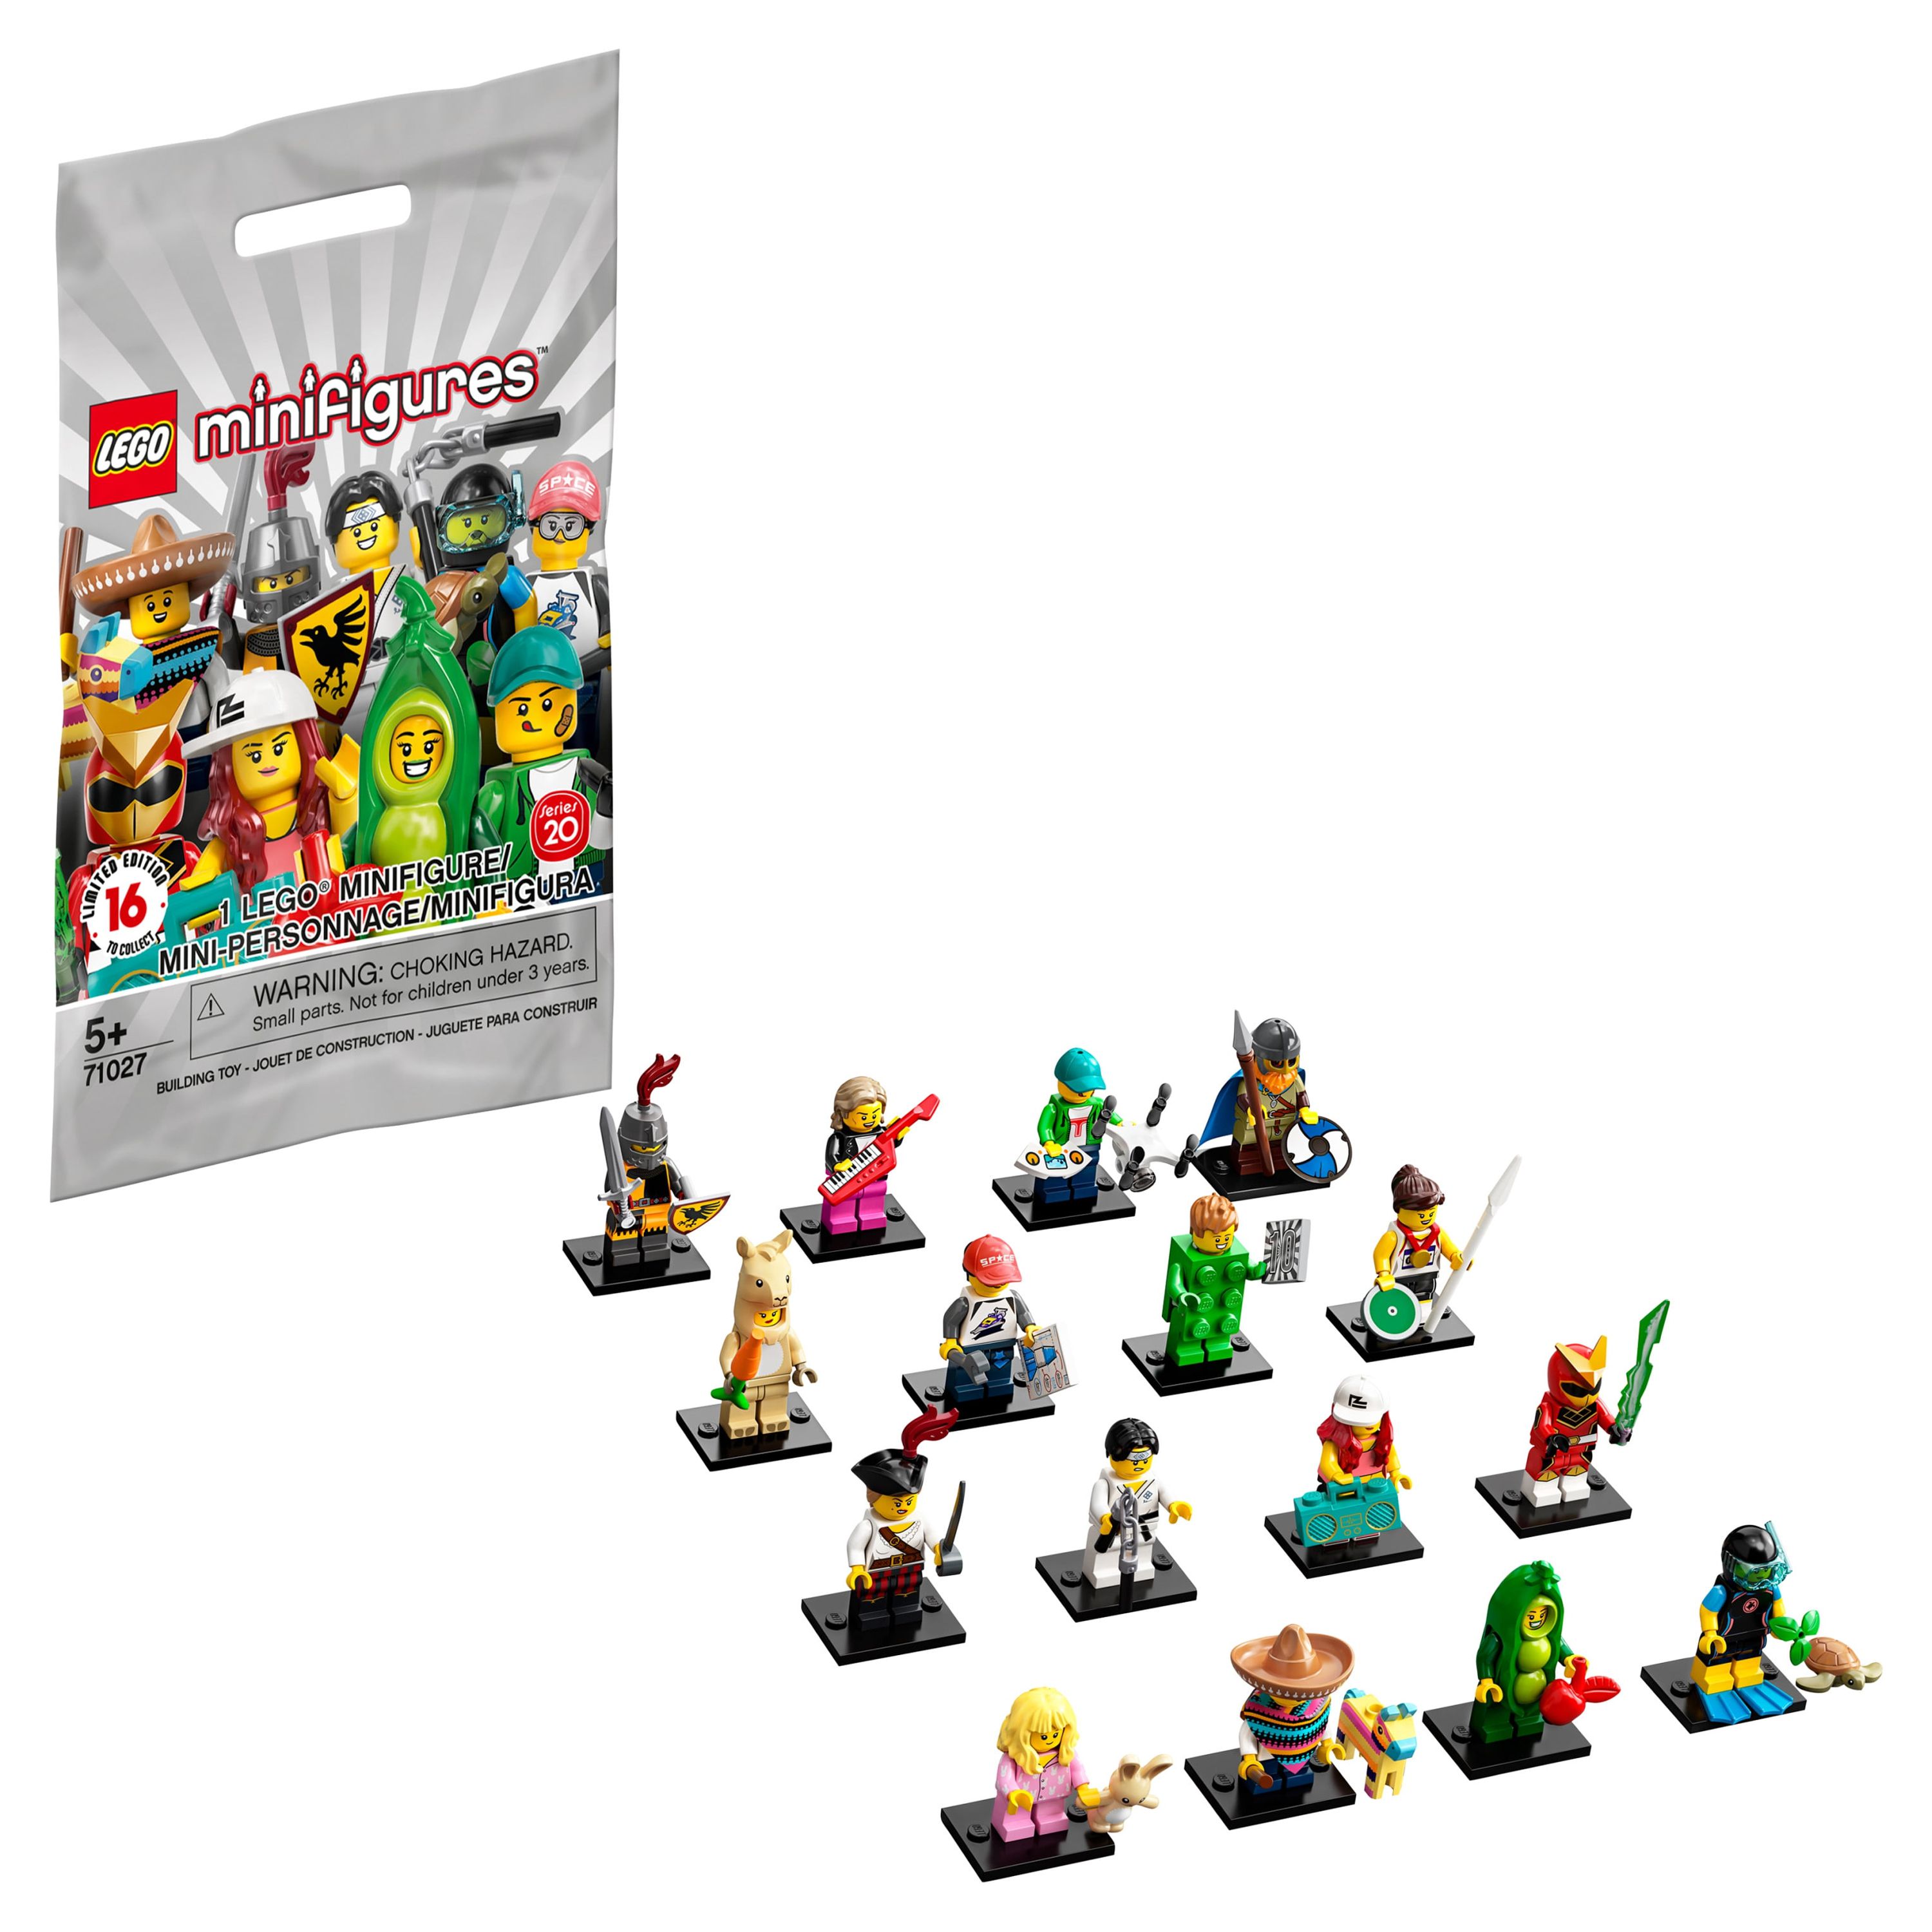 LEGO Minifigures Series 20 71027 Building Kit (1 of 16 to Collect), featuring Characters to Collect and Add to Existing Sets - image 1 of 5